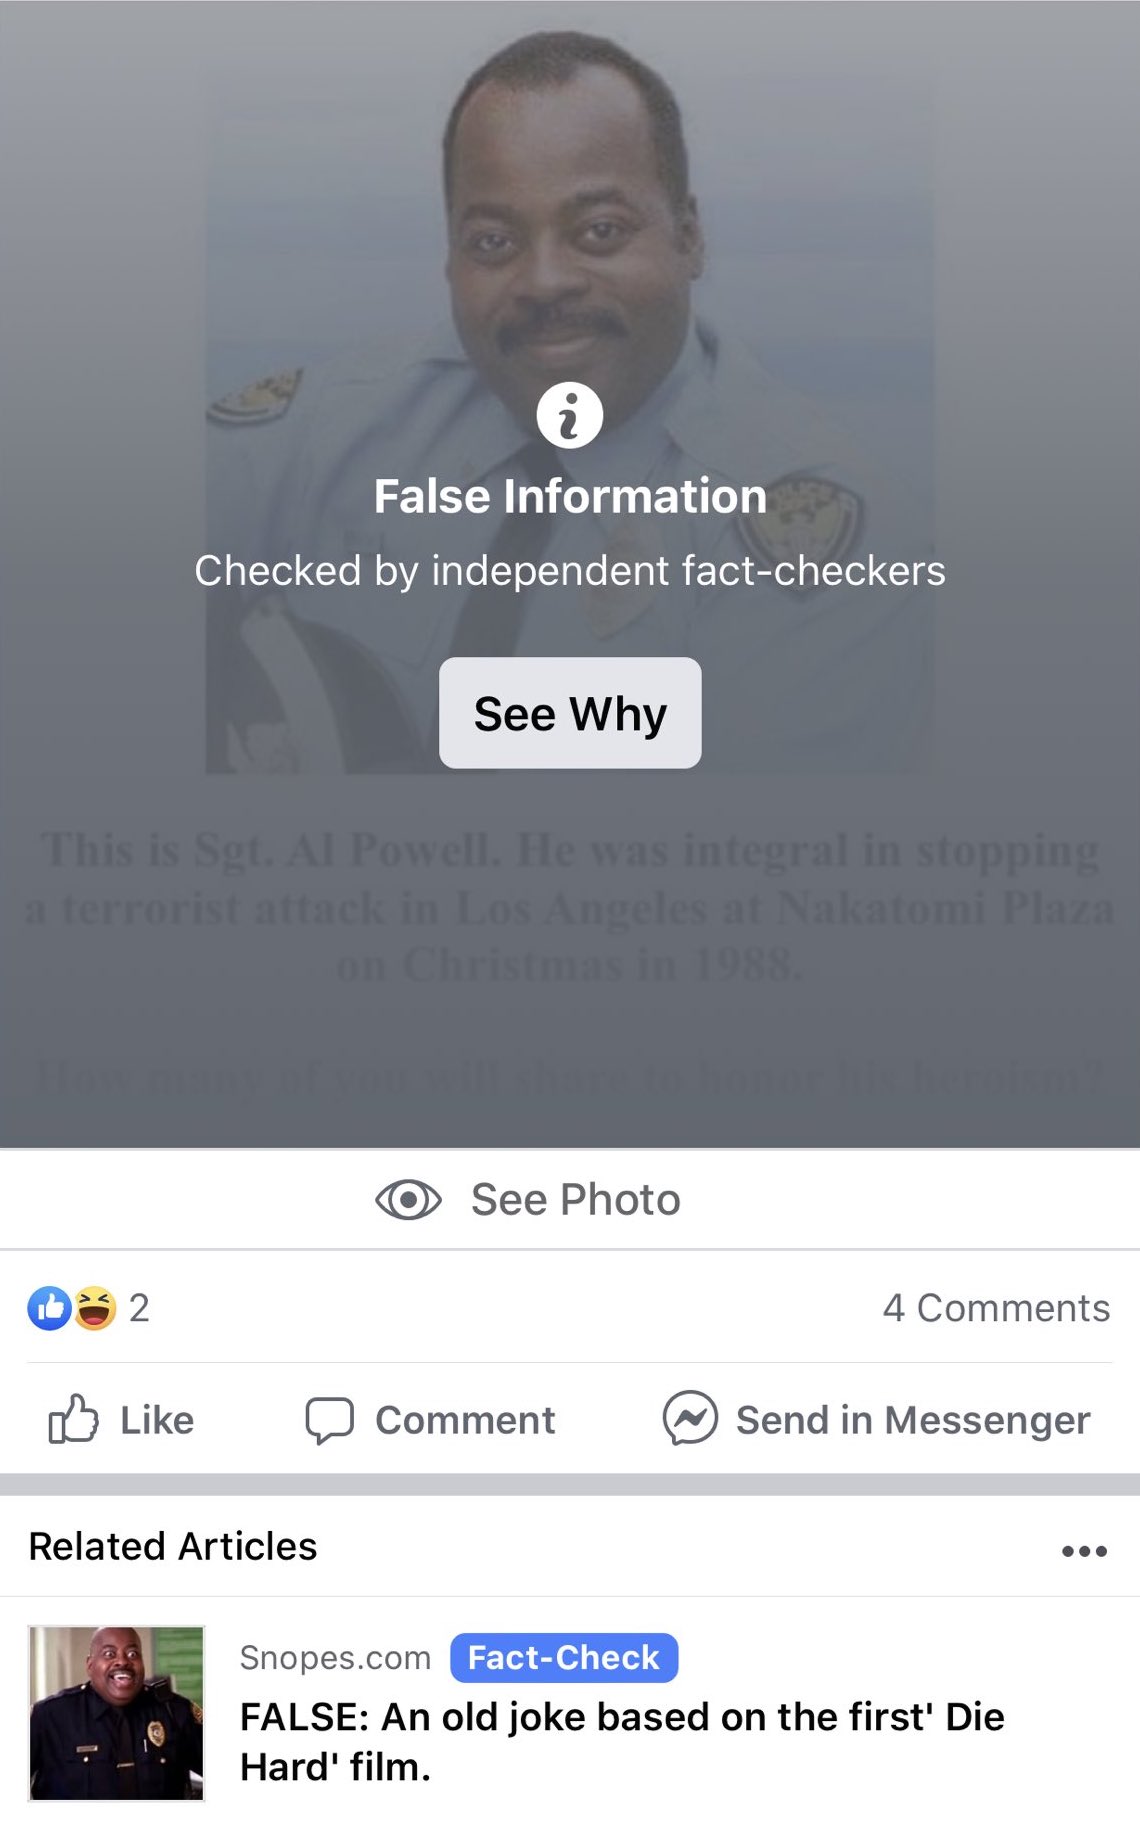 Facebook fact checks and censors Die Hard memes, labels them as "False